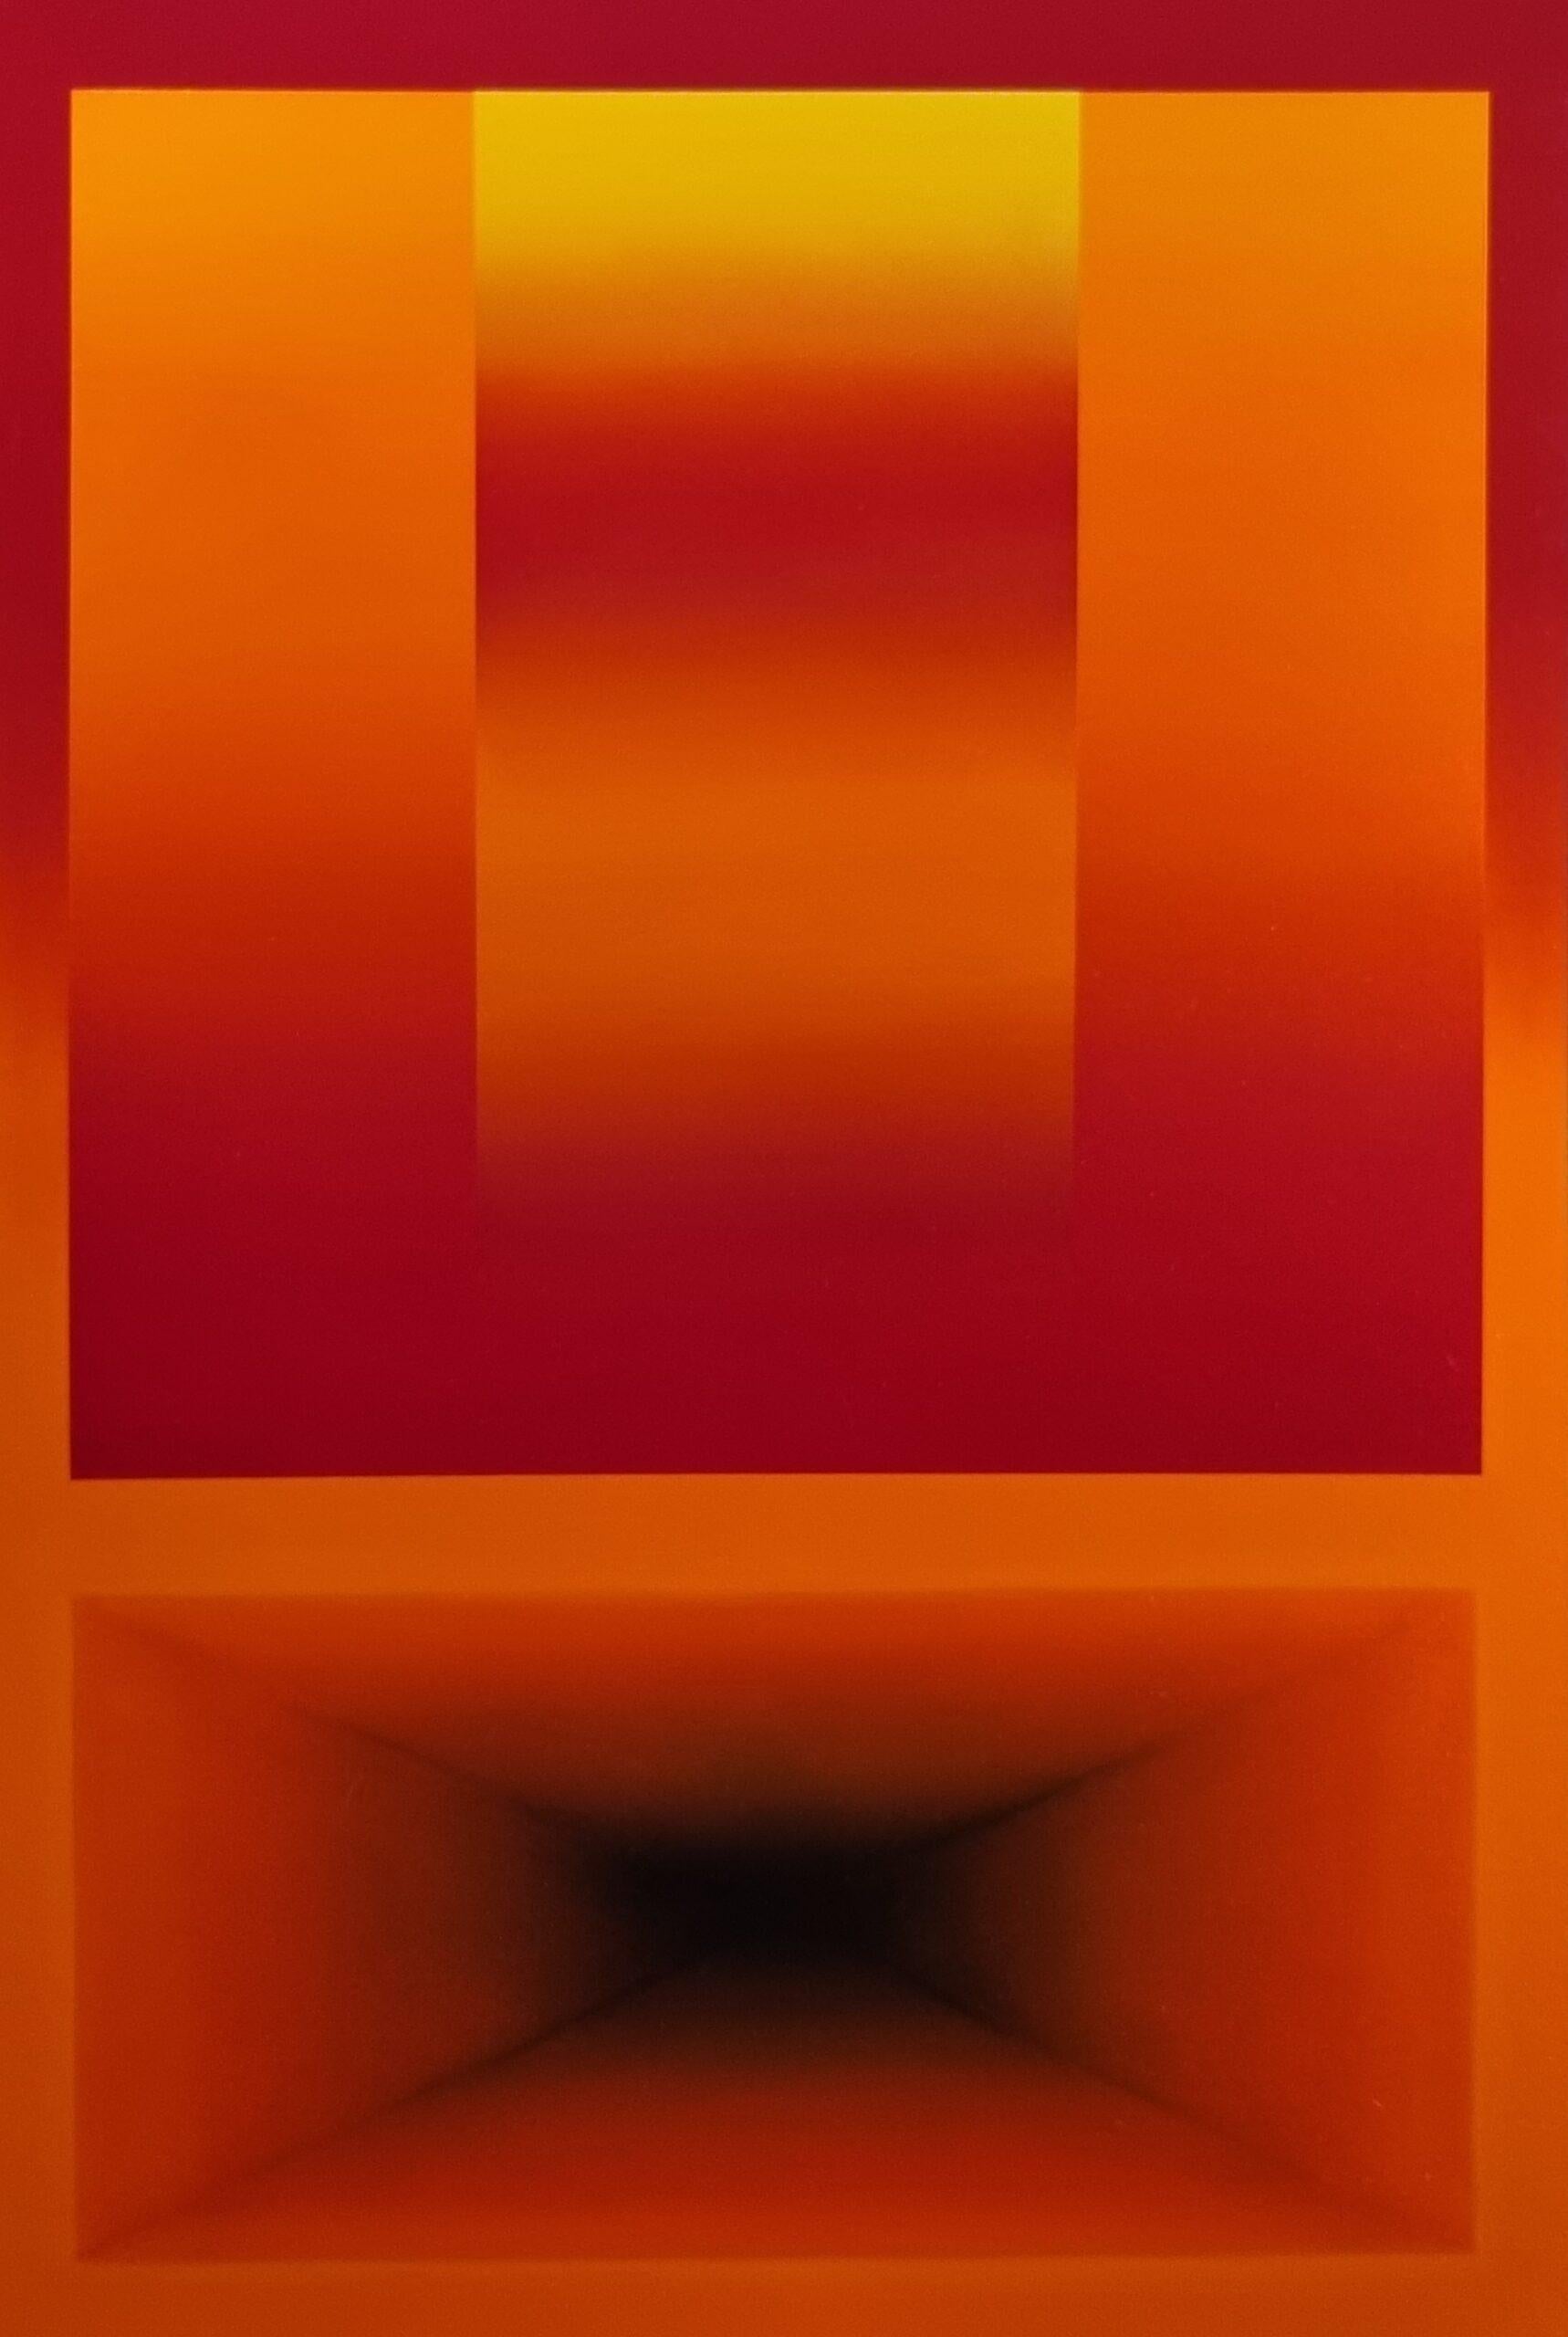 Structural Orange - Painting by Frans de Bruyn